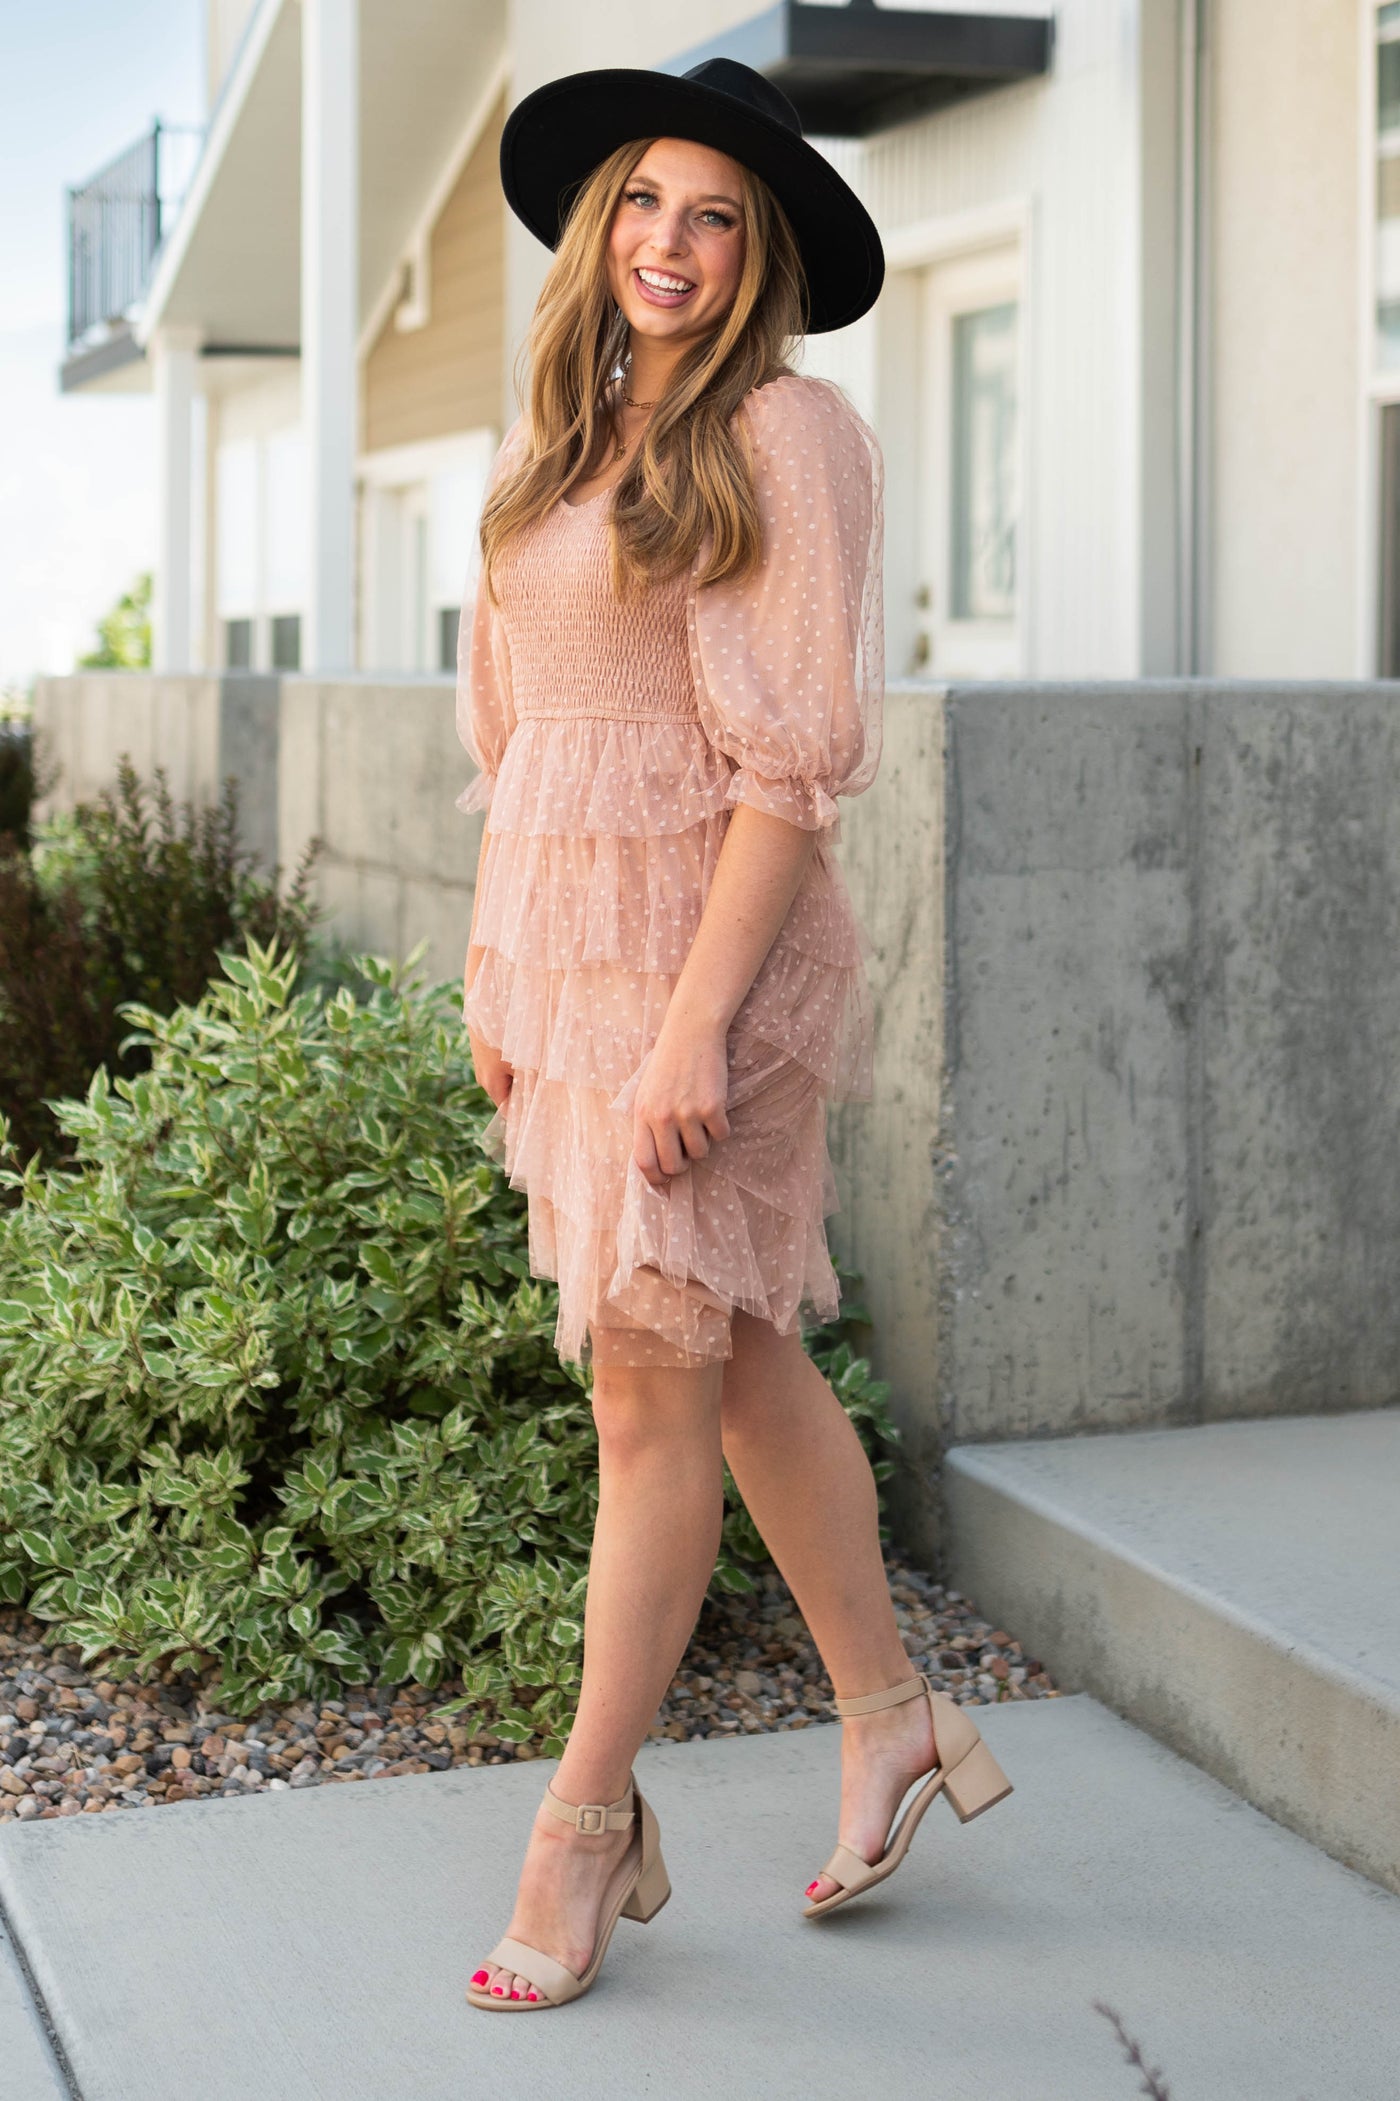 Ruffle tulle skirt of a nude dress